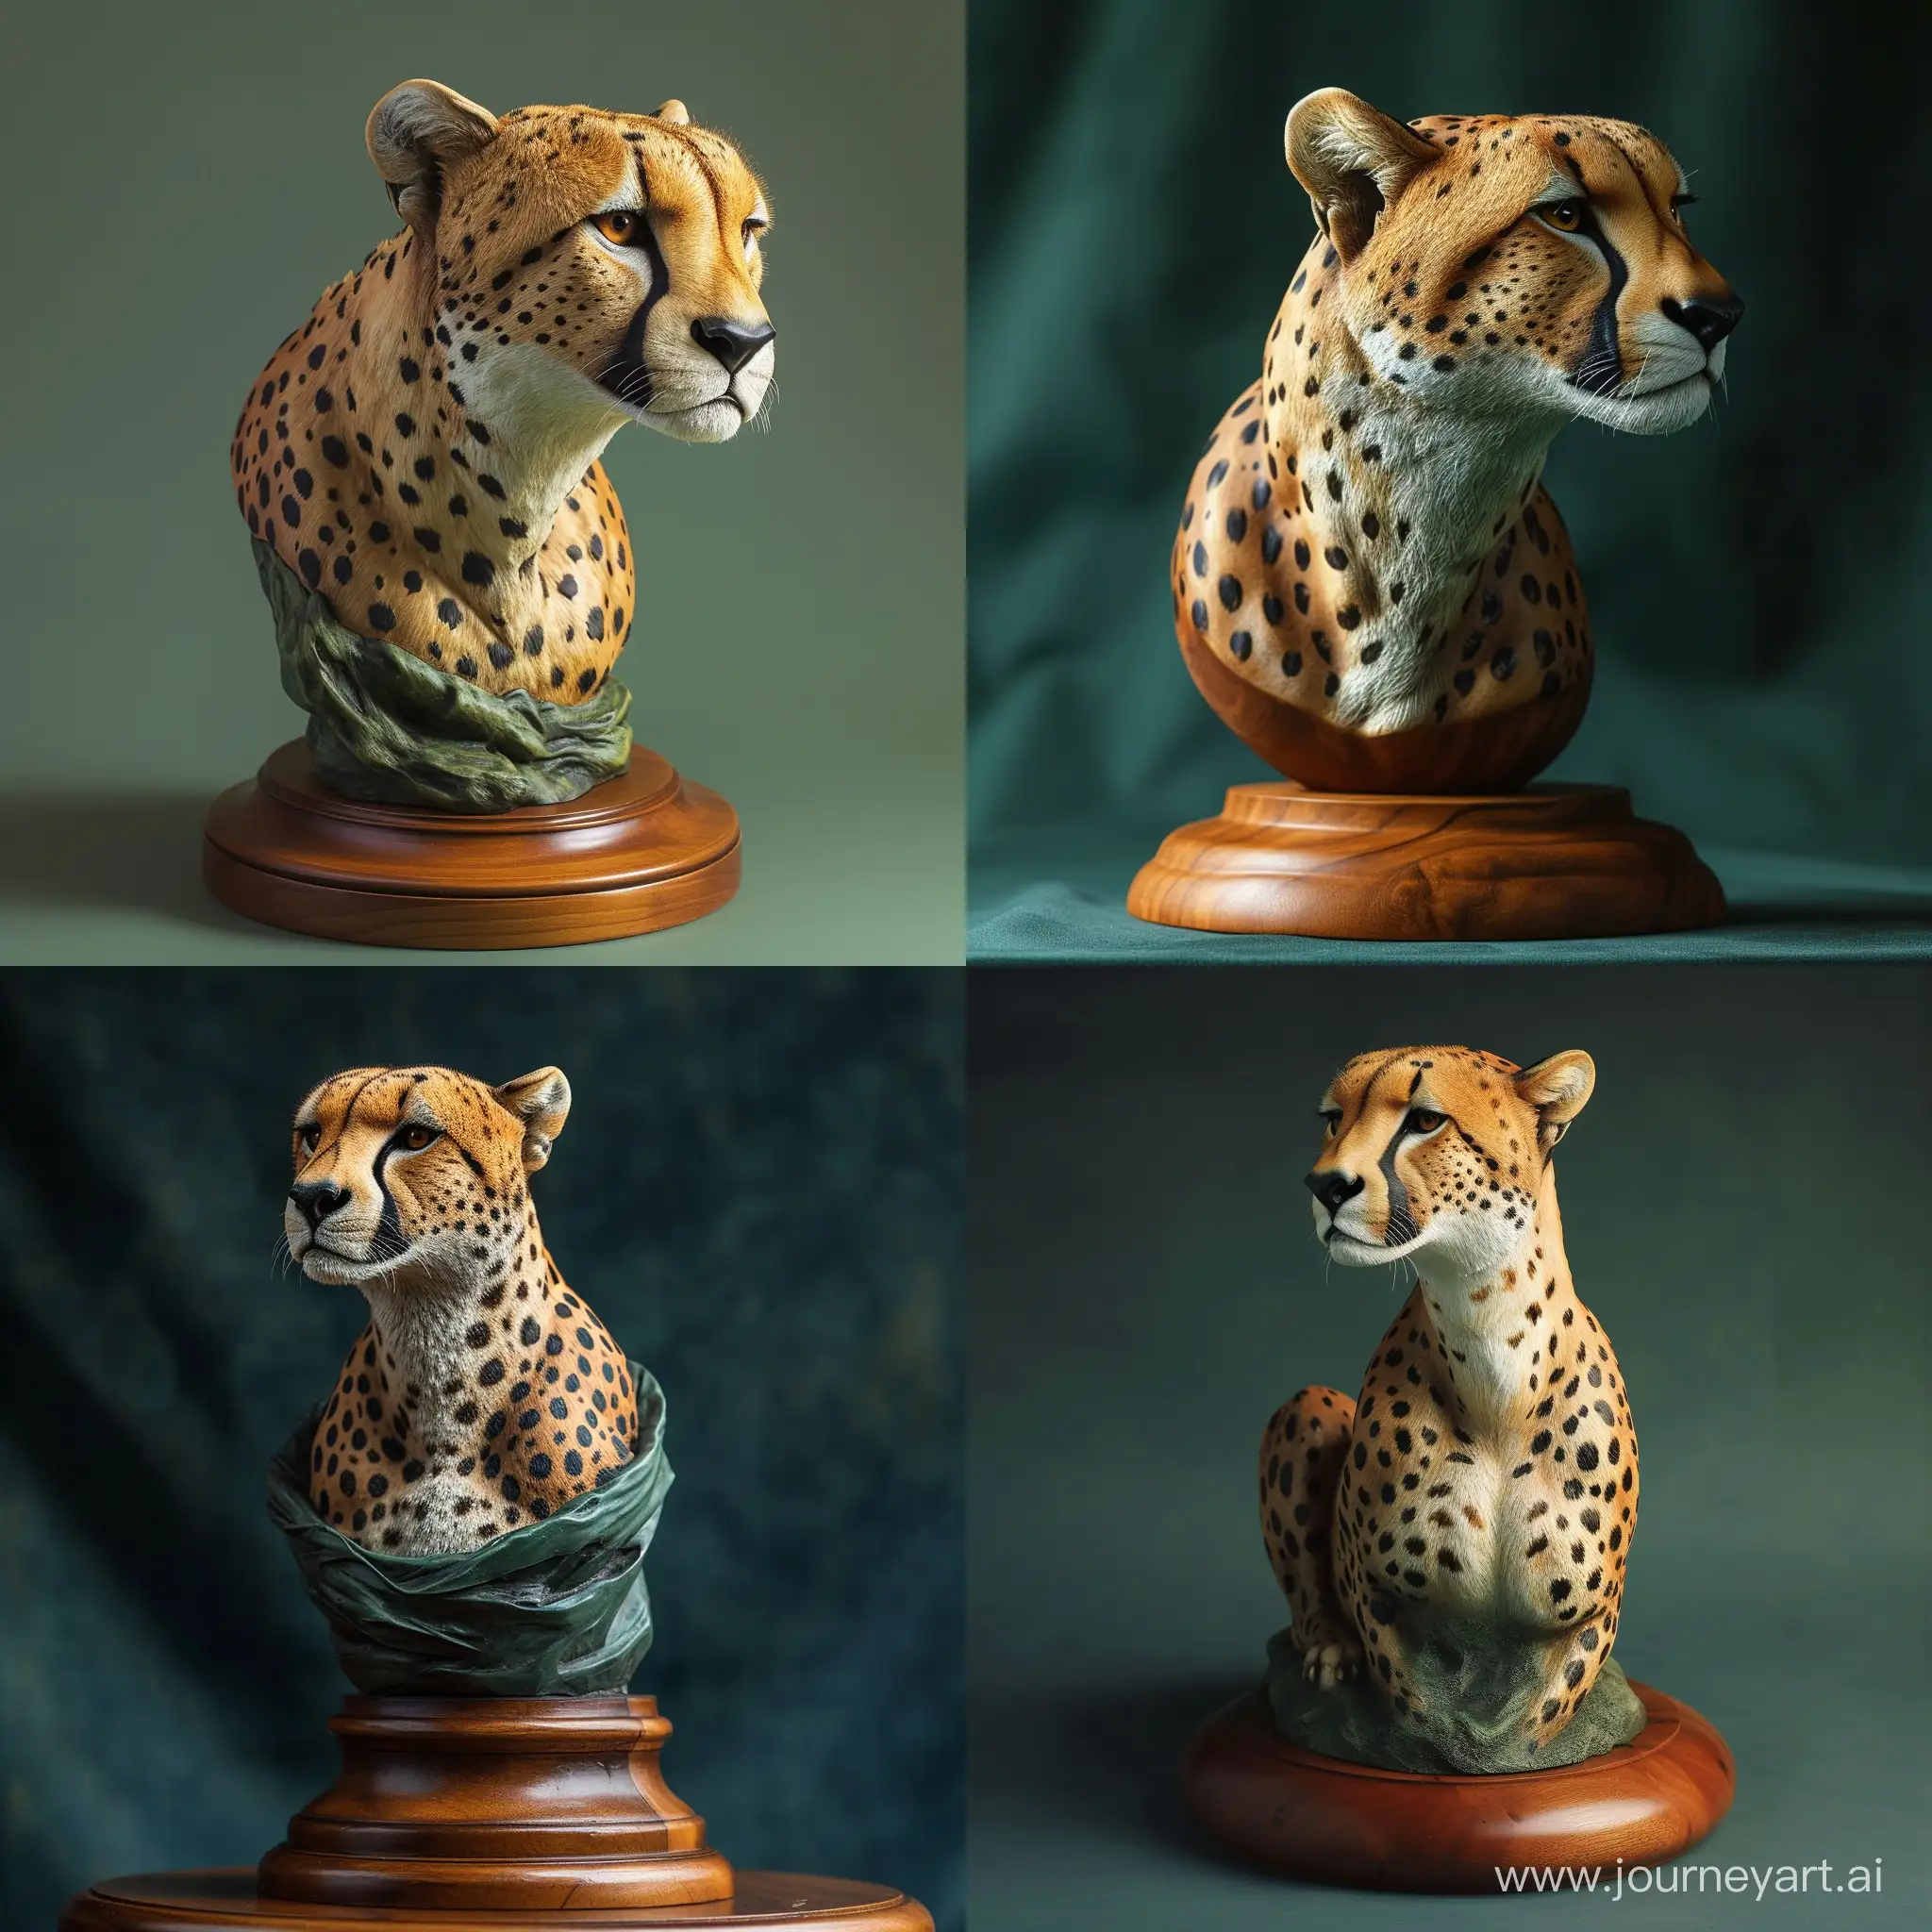 A Sculpture of Cheetah Wooden Base, Bust Style, Hunter Green Background, Cinematic Pose, High Precision